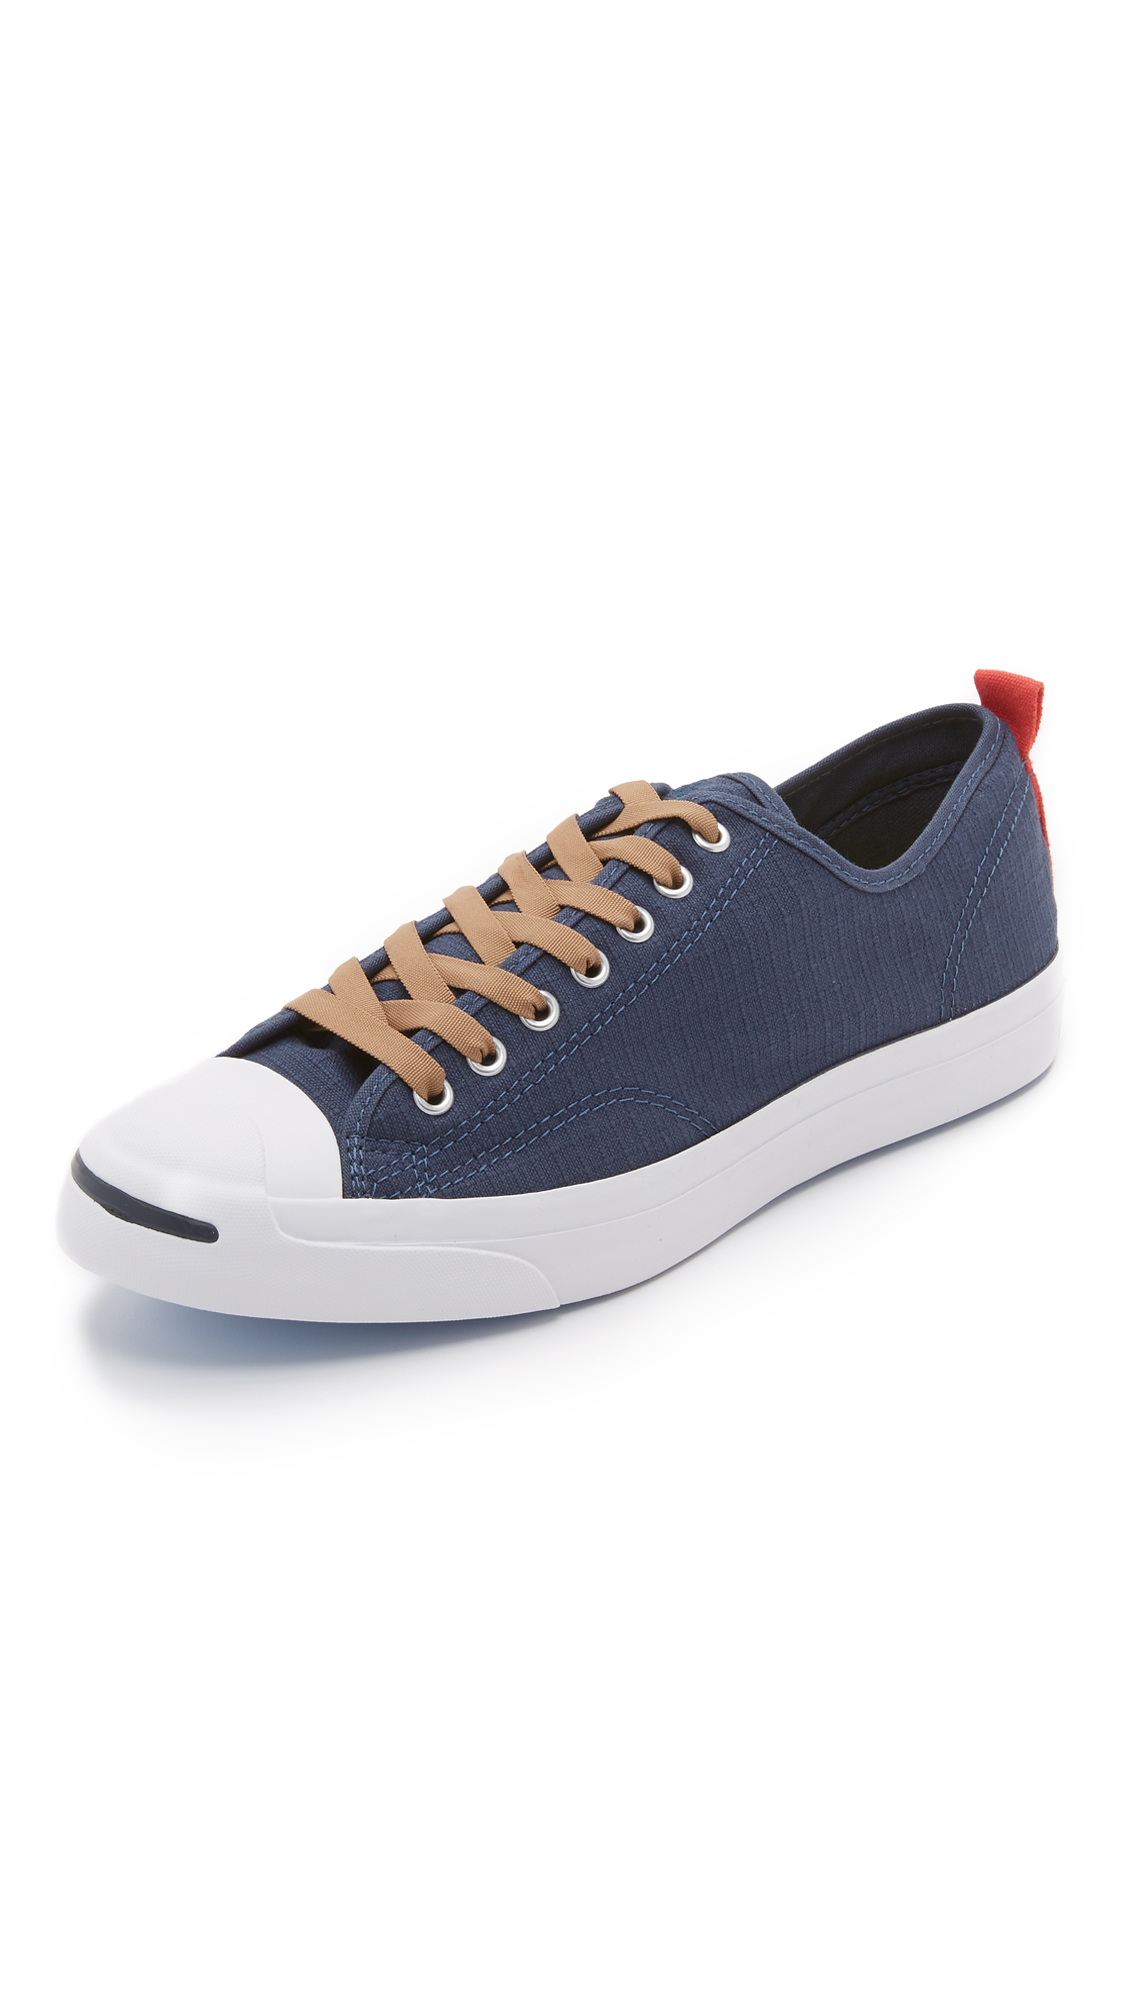 Converse Jack Purcell Jack Ripstop Sneakers In Navy/white/sand Dune ...